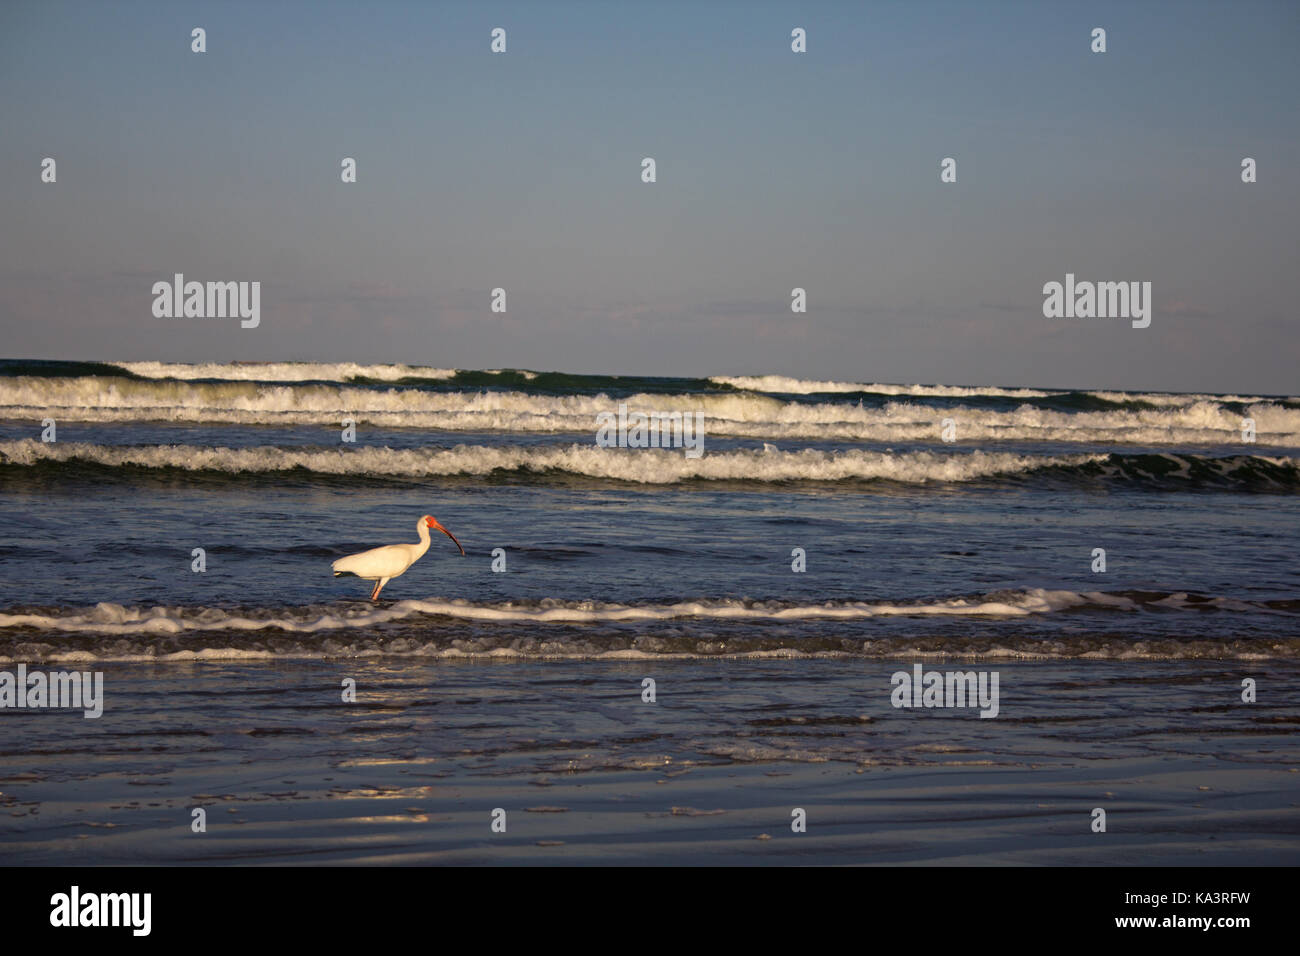 White Ibis wading in the surf along the Florida Atlantic Coast close to sunset. White wave crests and a brilliant white bird. Stock Photo